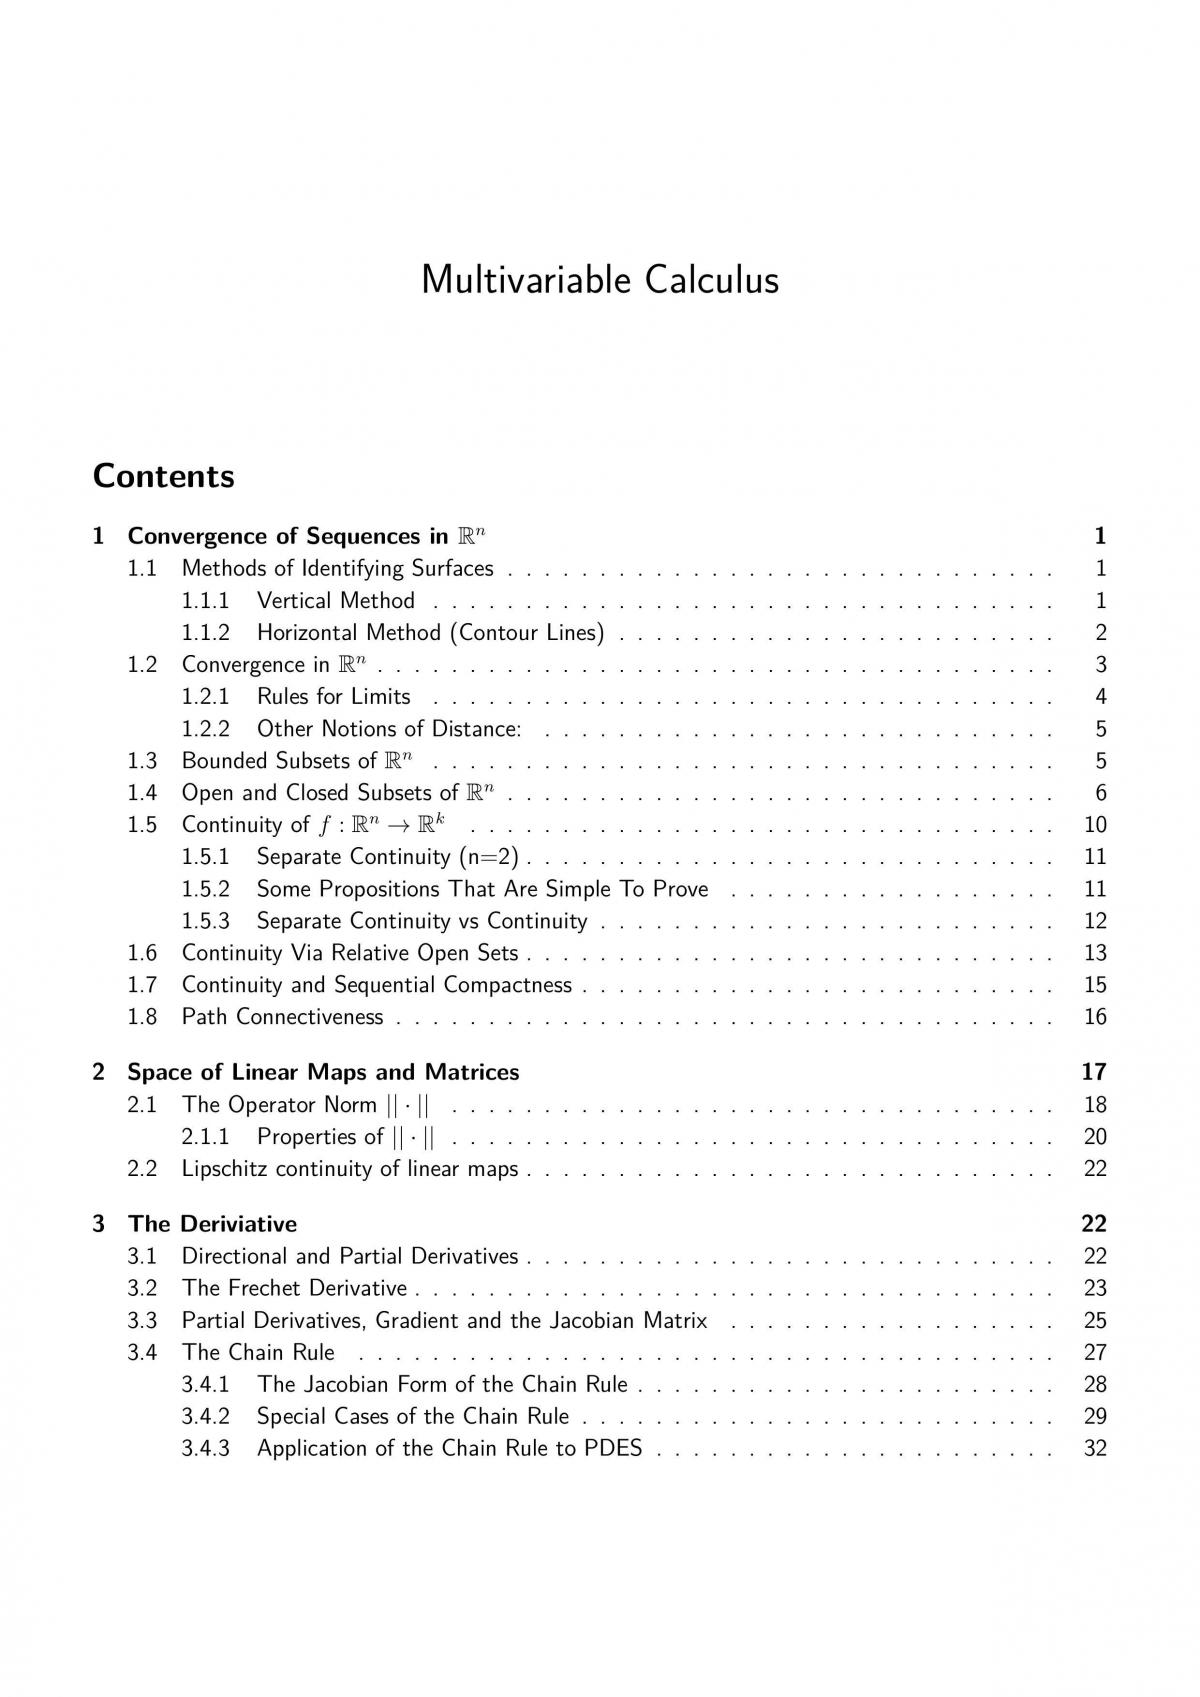 MA259 Multivariable Calculus Notes - Page 1